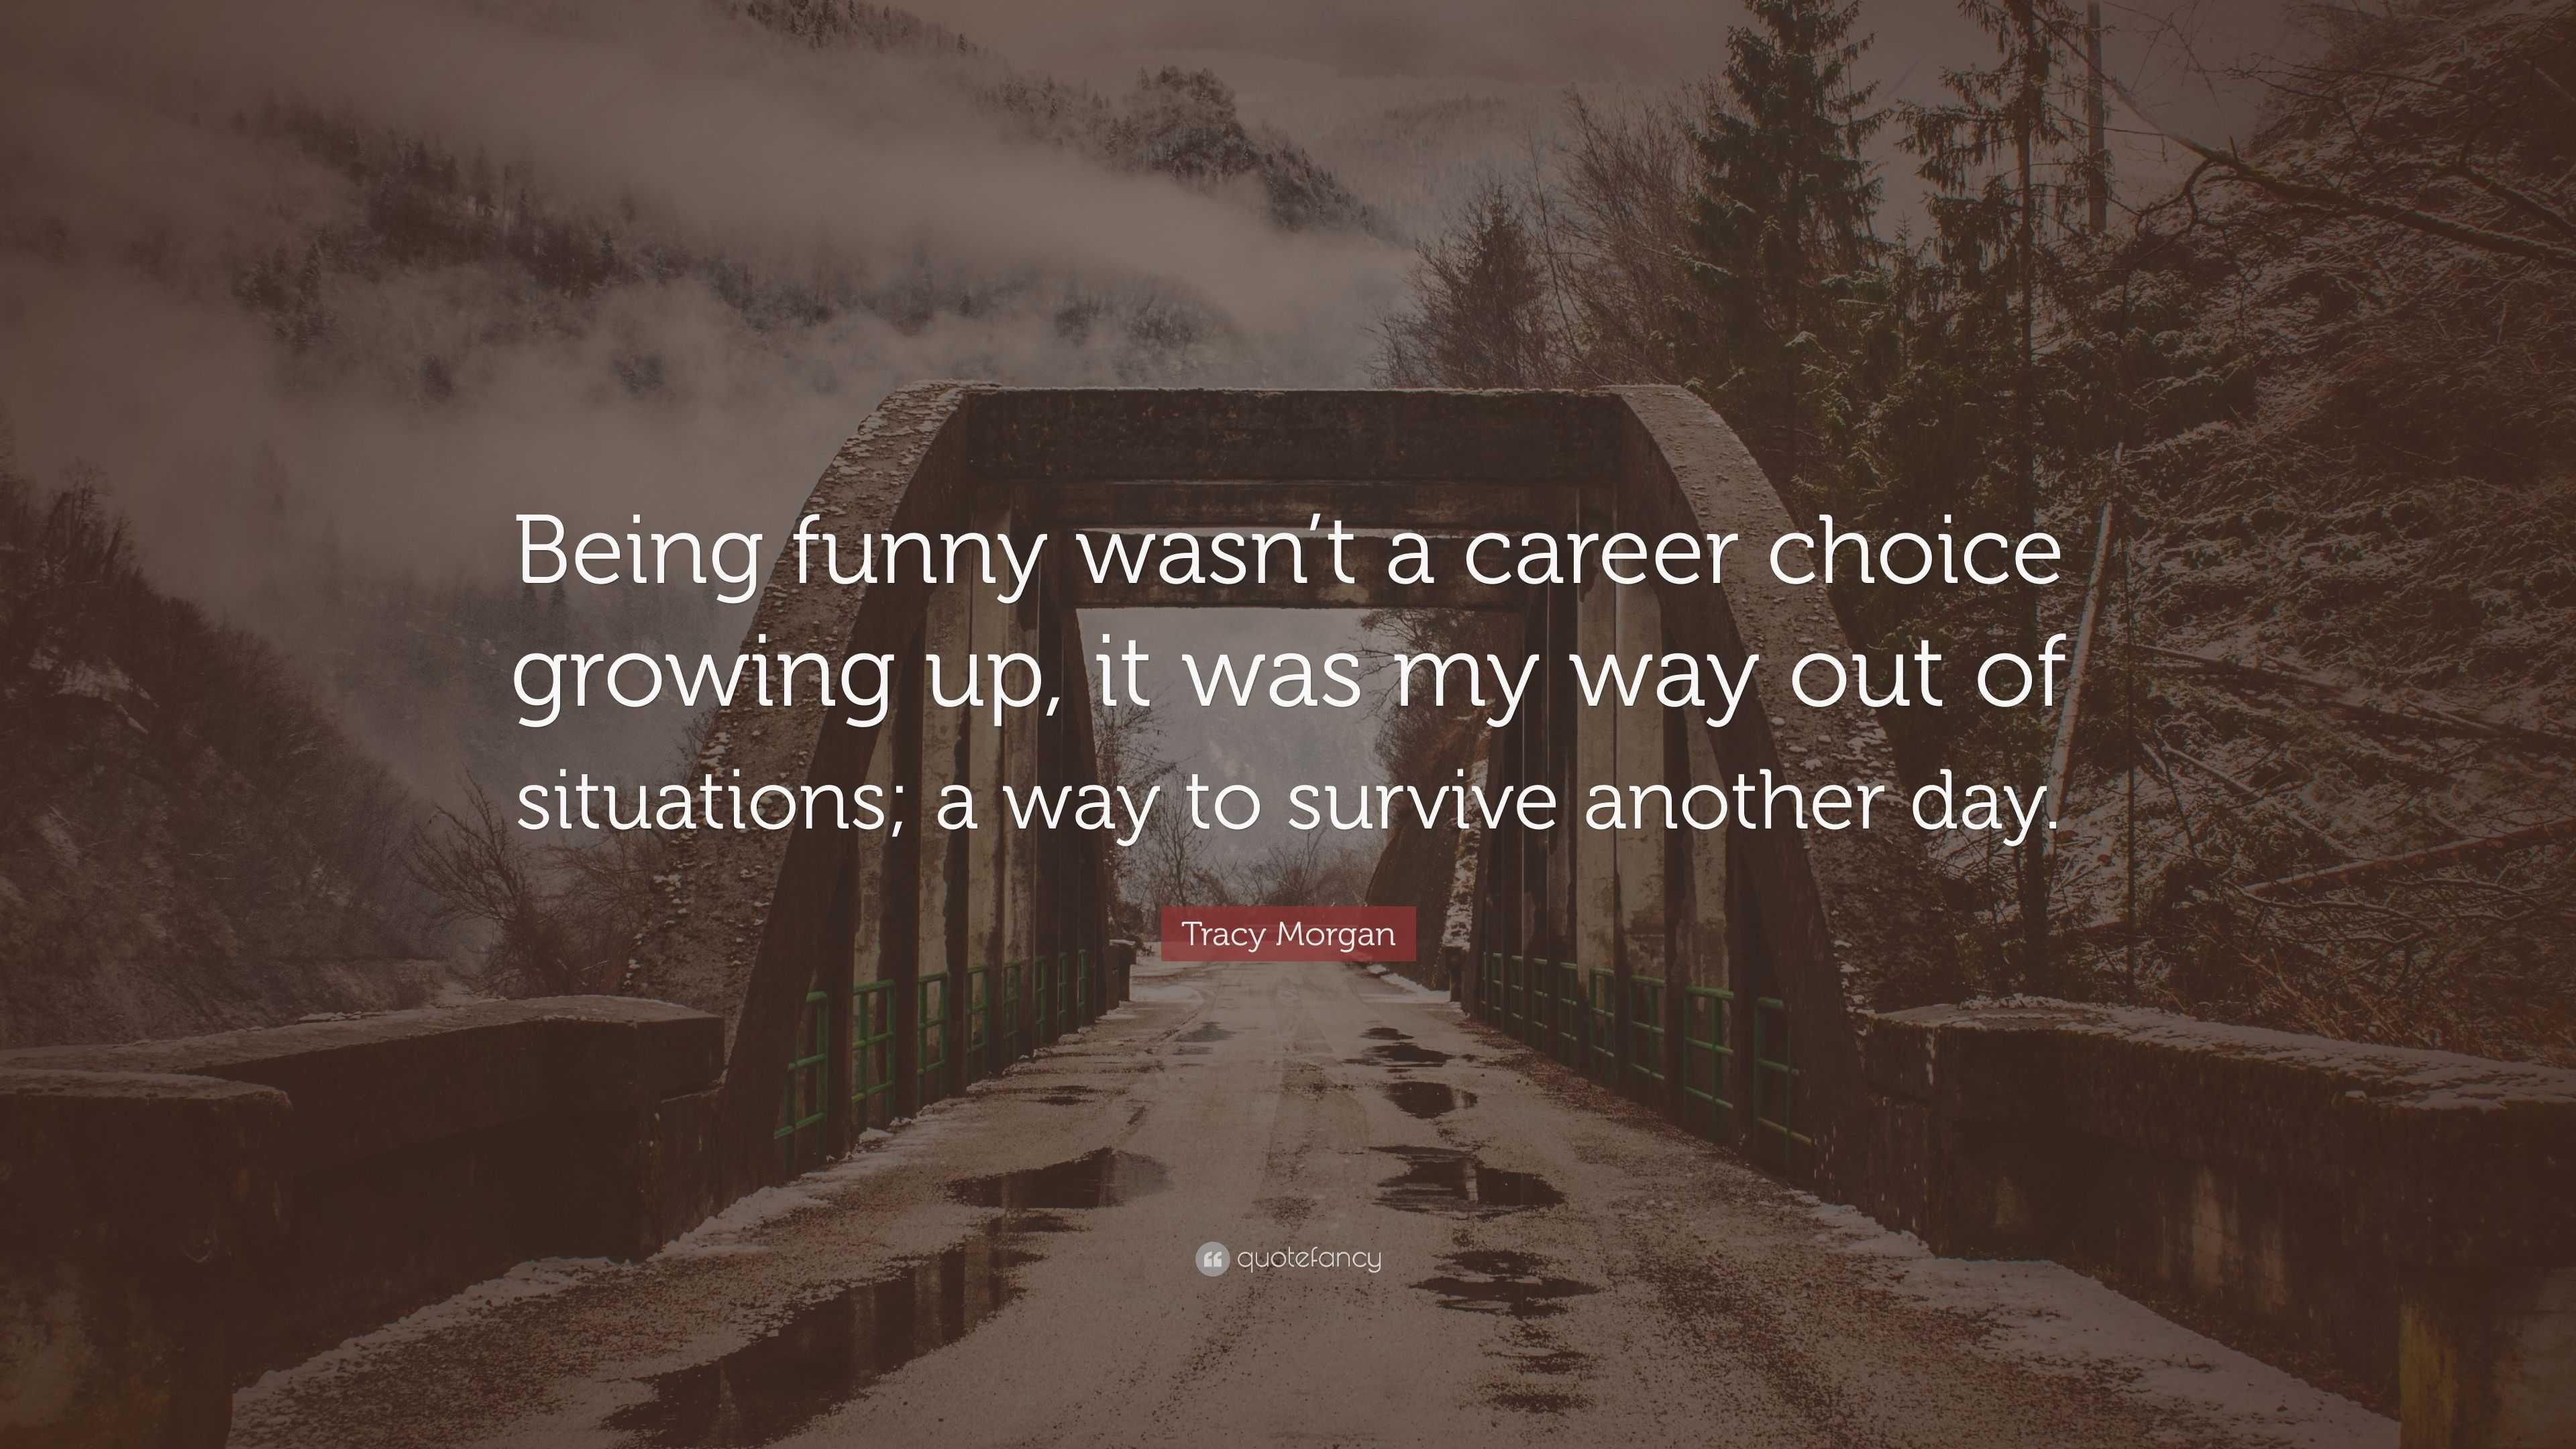 Tracy Morgan Quote: “Being funny wasn't a career choice growing up, it was  my way